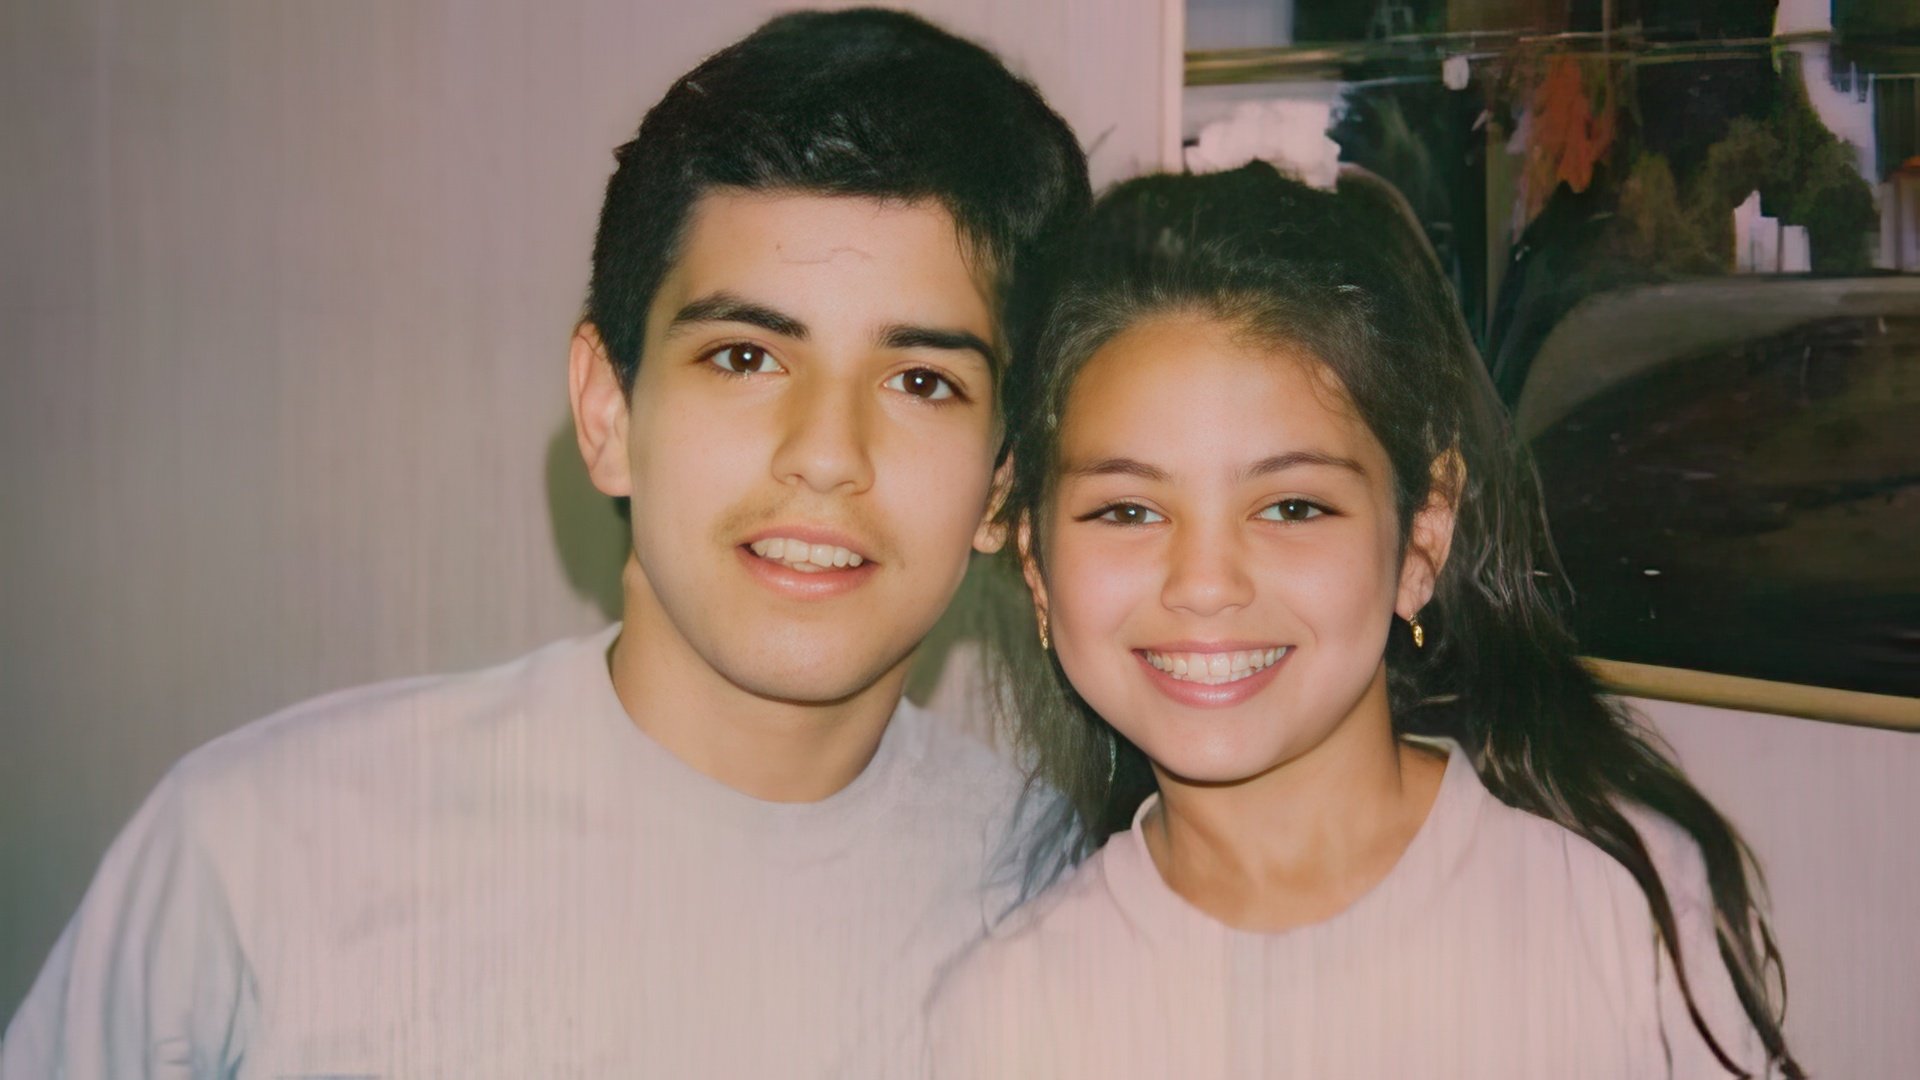 Little Mila Kunis with her brother Michael